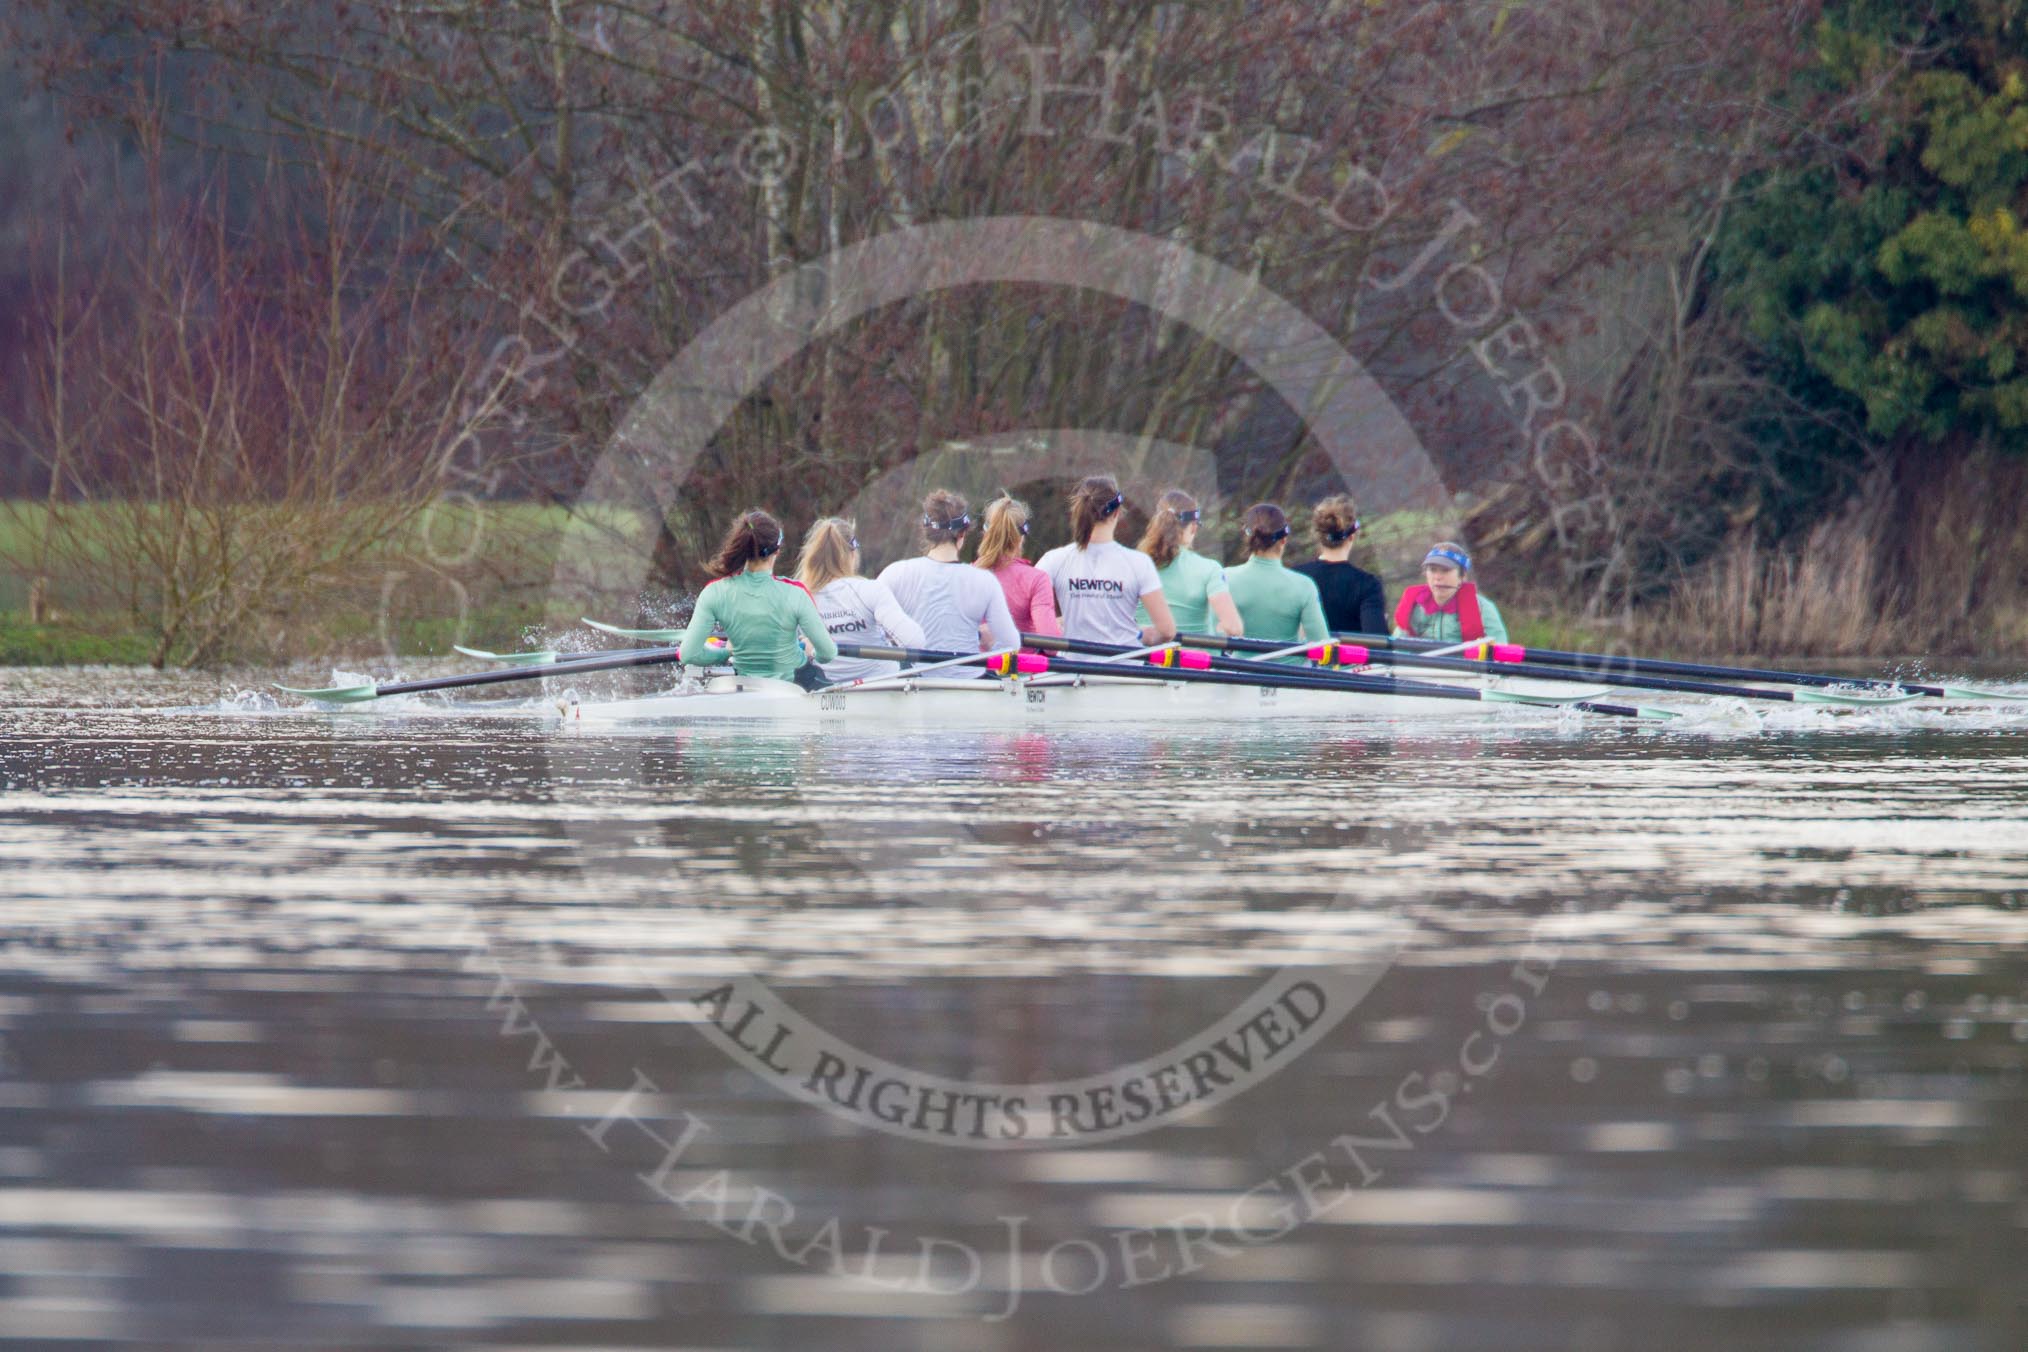 The Boat Race season 2013 - CUWBC training: The CUWBC Blue Boat on the way back from Temple Island to Henley: Bow Caroline Reid, 2 Fay Sandford, 3 Melissa Wilson, 4  Jessica Denman, 5 Vicky Shaw, 6 Claire Watkins, 7 Emily Day, stroke Holly Game, and cox Esther Momcilovic..
River Thames near Remenham,
Henley-on-Thames,
Oxfordshire,
United Kingdom,
on 19 March 2013 at 15:38, image #52